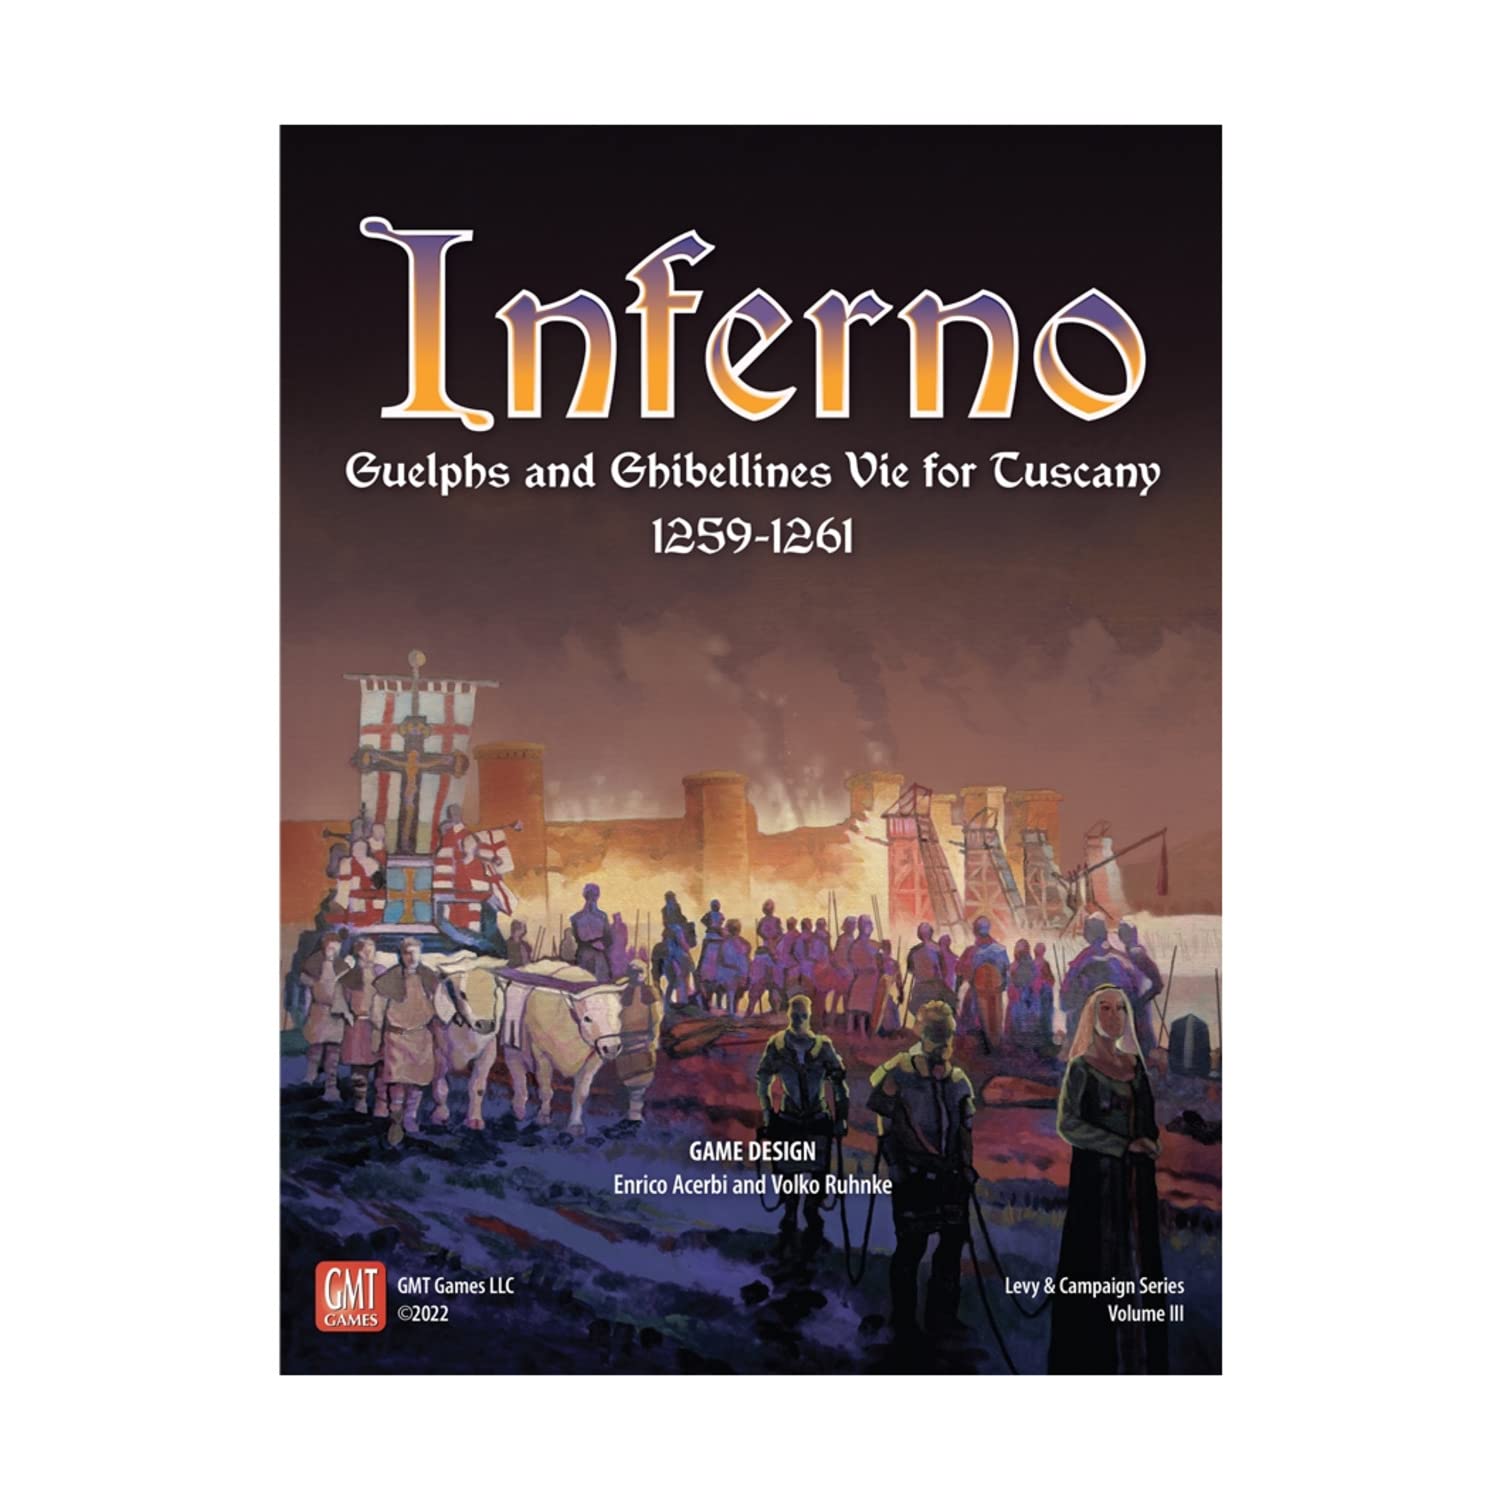 GMT Games Inferno - Guelphs and Ghibellines Vie for Tuscany 1259-1261